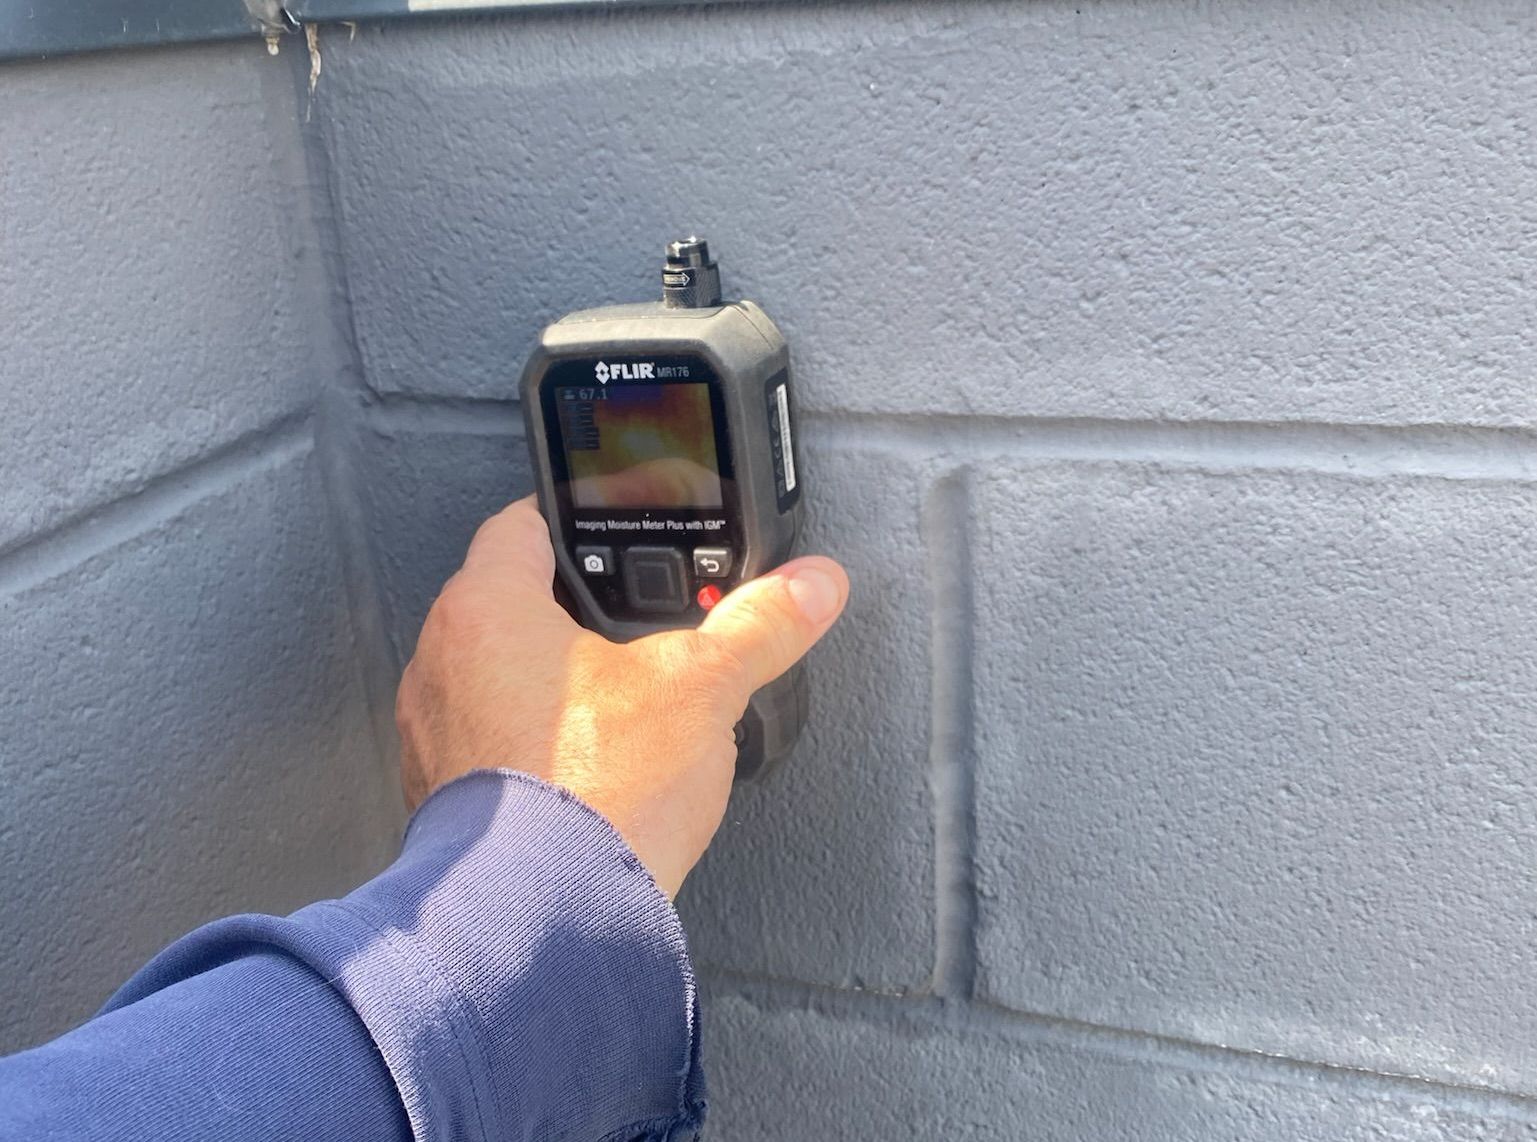 Moisture meter on wet cement block wall showing 85 percent moisture - average normal moisture content is 30 percent or less.